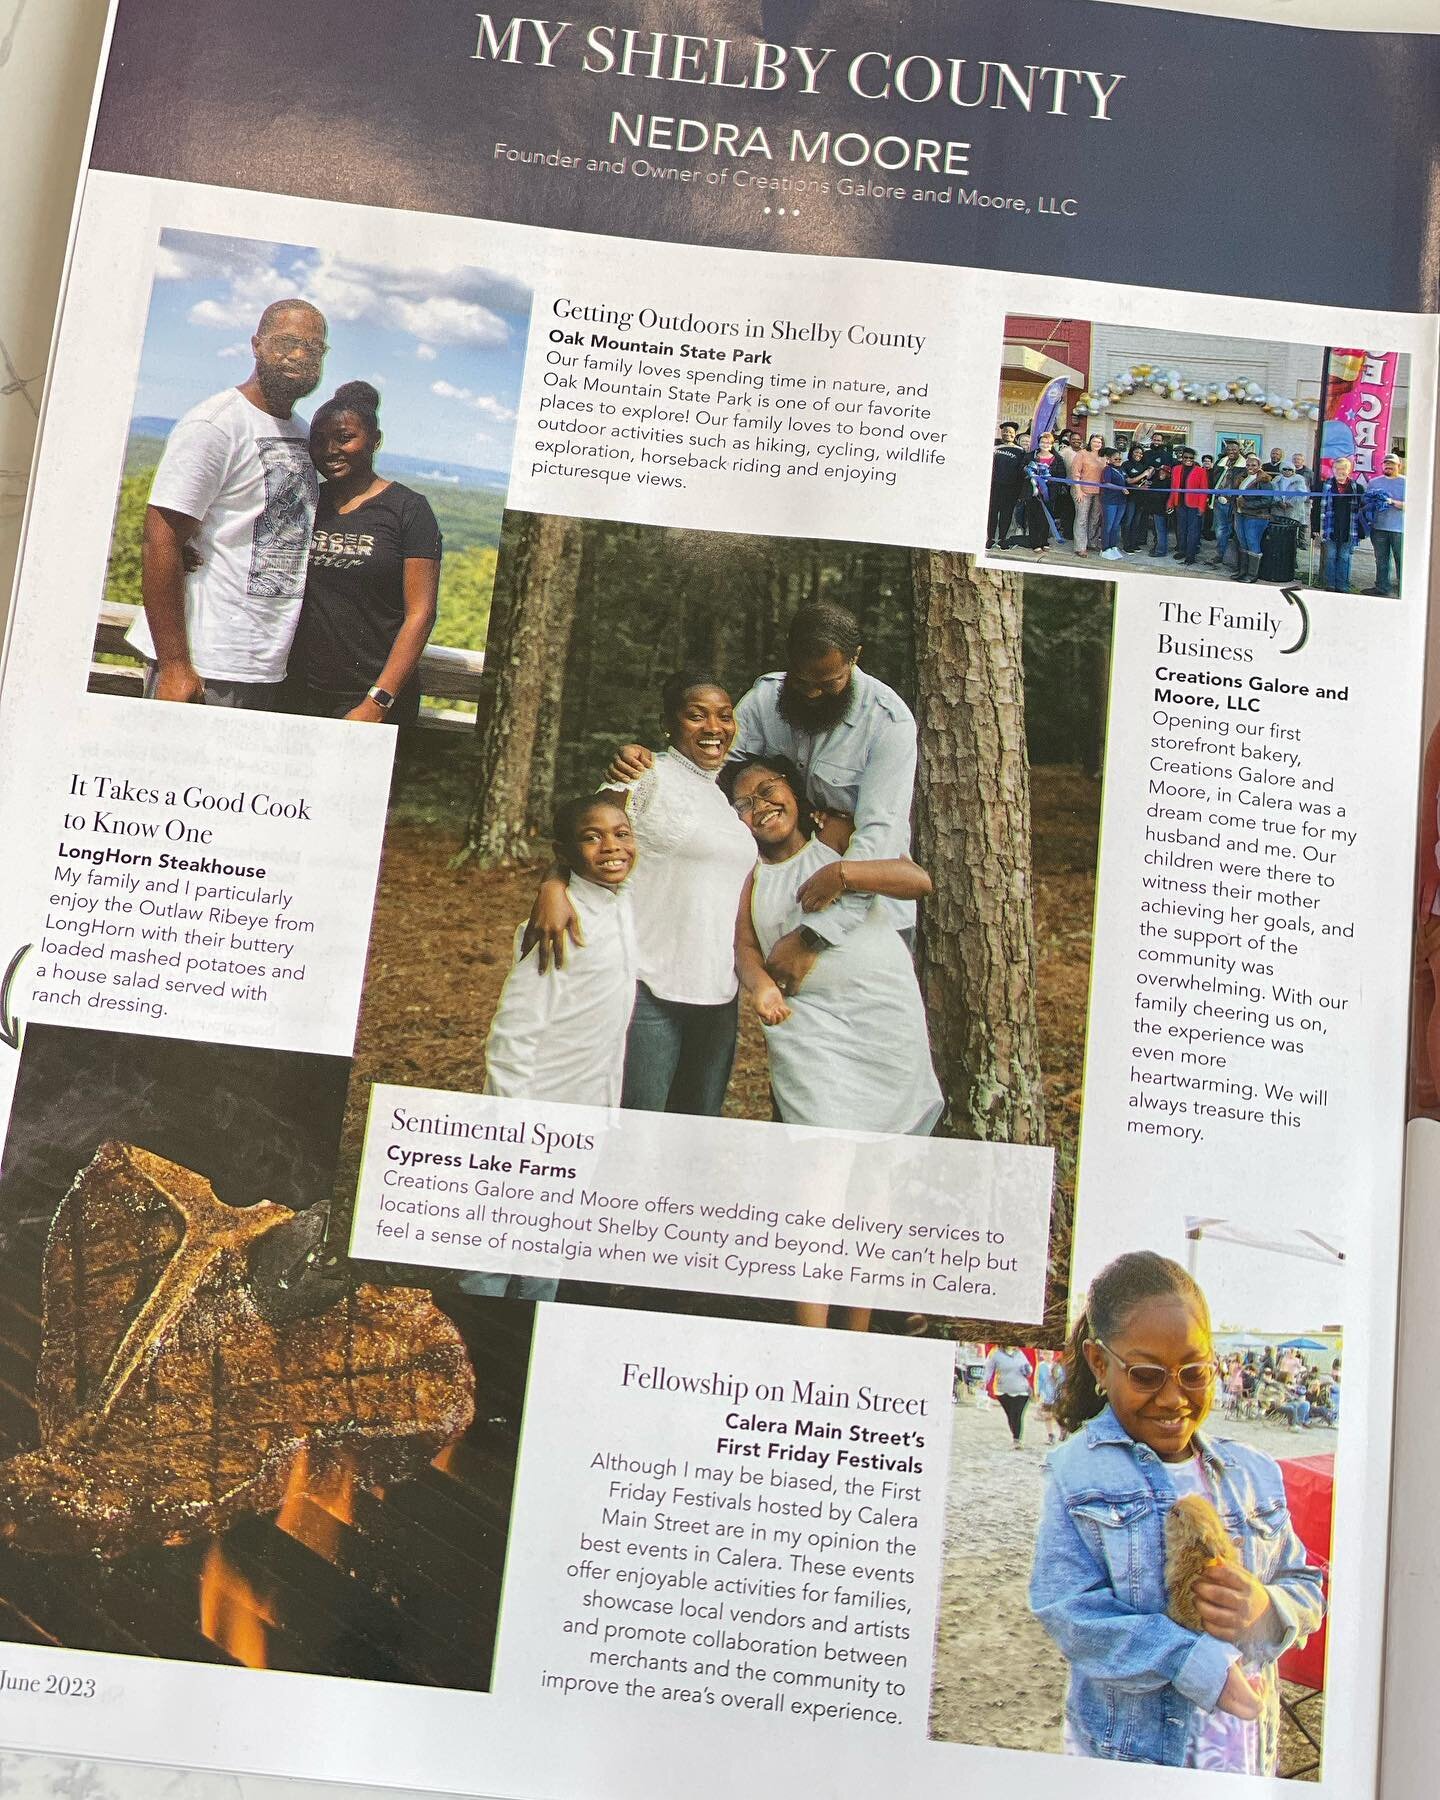 Expressing Gratitude to Shelby Living Magazine.

Thank you @shelbylivingmagazine for featuring us in the &ldquo;My Shelby County&rdquo; section. We are thrilled to be a part of such a wonderful community. 
#shelbylivingmagazine #myshelbycounty #commu